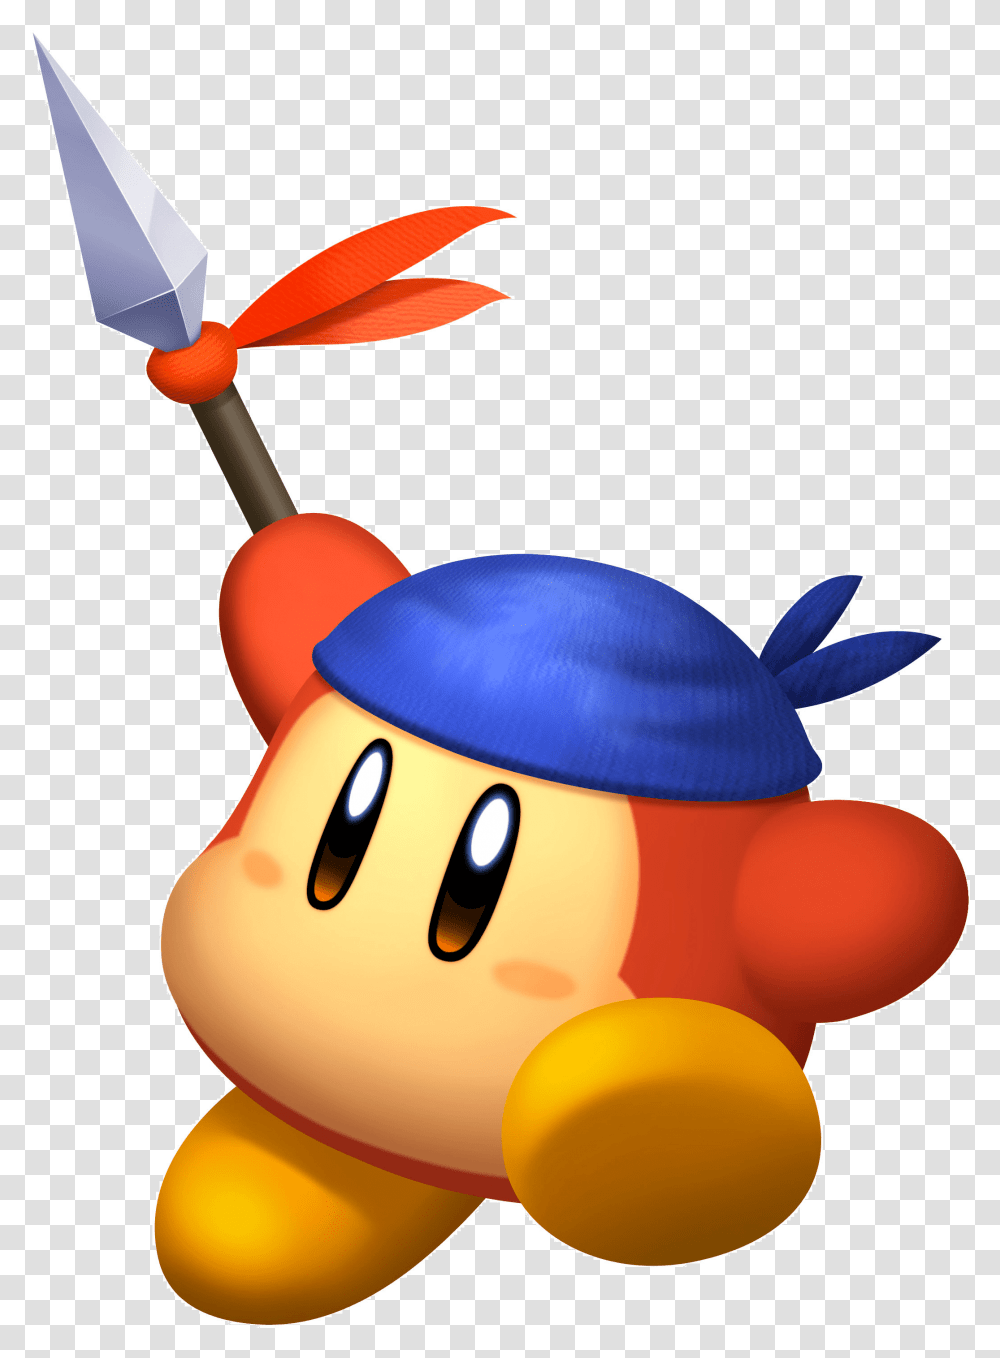 Super Mario Wacky Faces 4 Image Kirby Star Allies Waddle Dee, Outdoors, Weapon, Weaponry, Shears Transparent Png